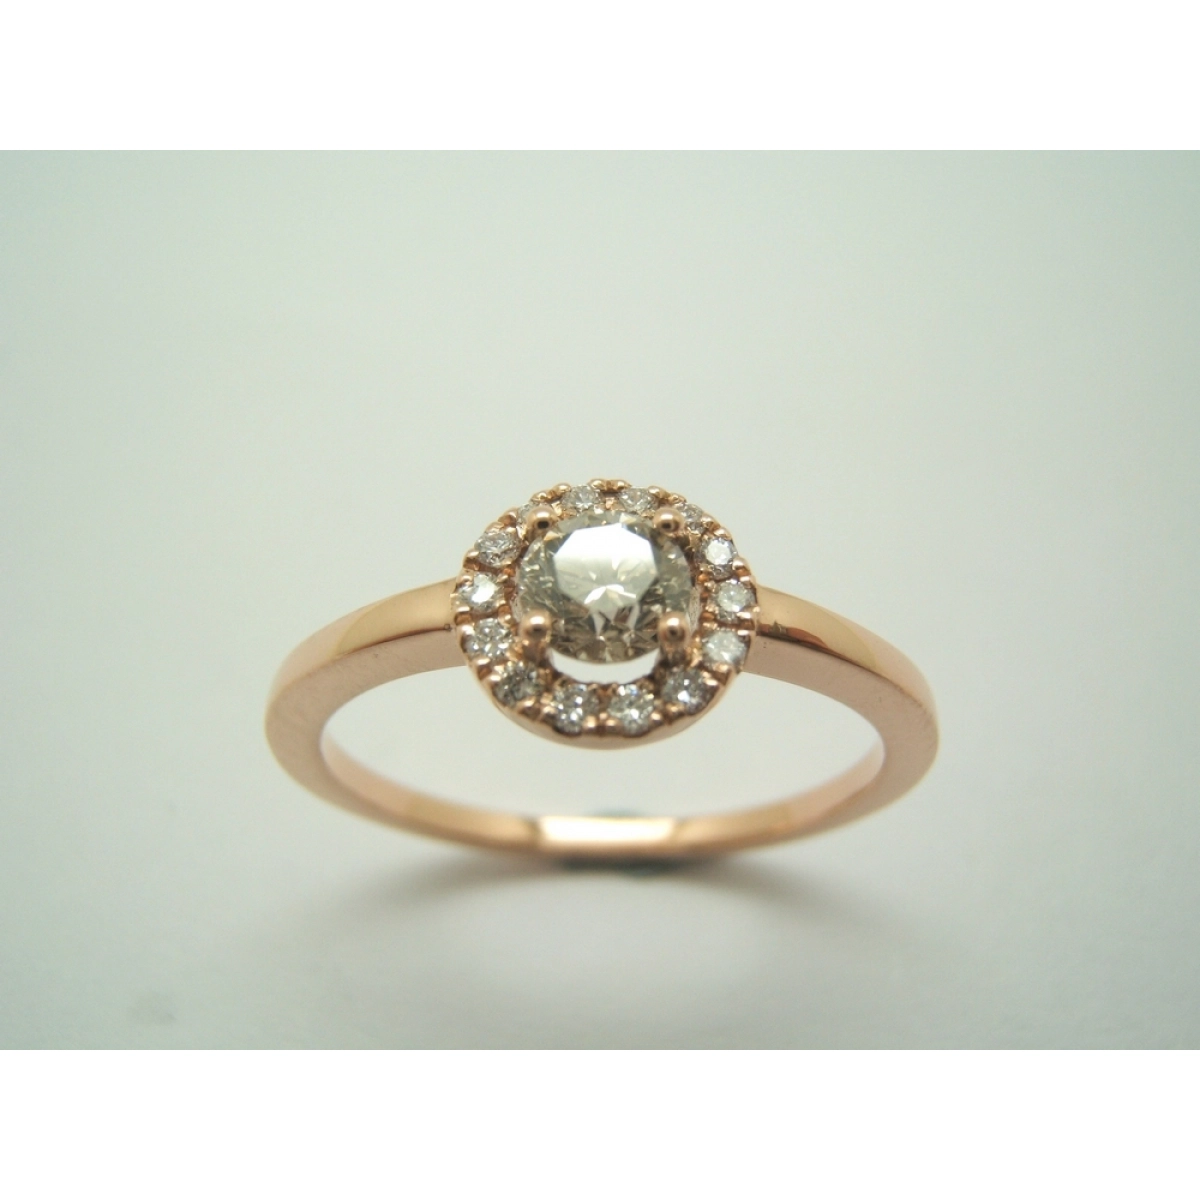 RING SOLITAIRE ROSE GOLD AND DIAMONDS B-79